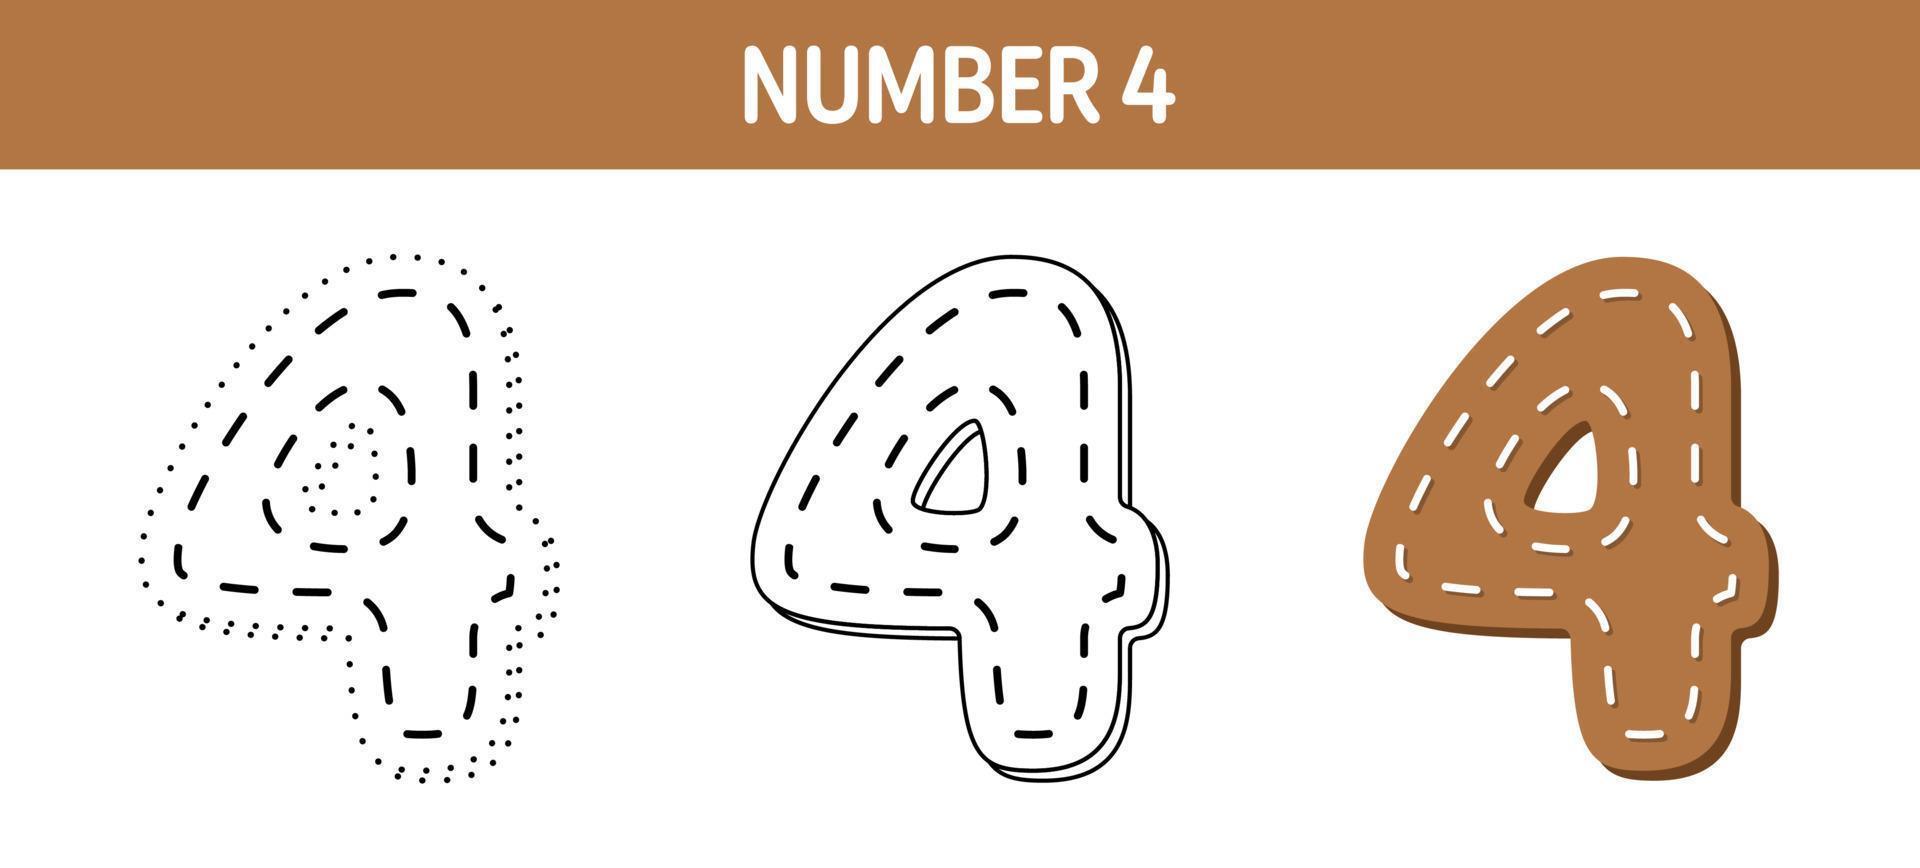 Number 4 tracing and coloring worksheet for kids vector